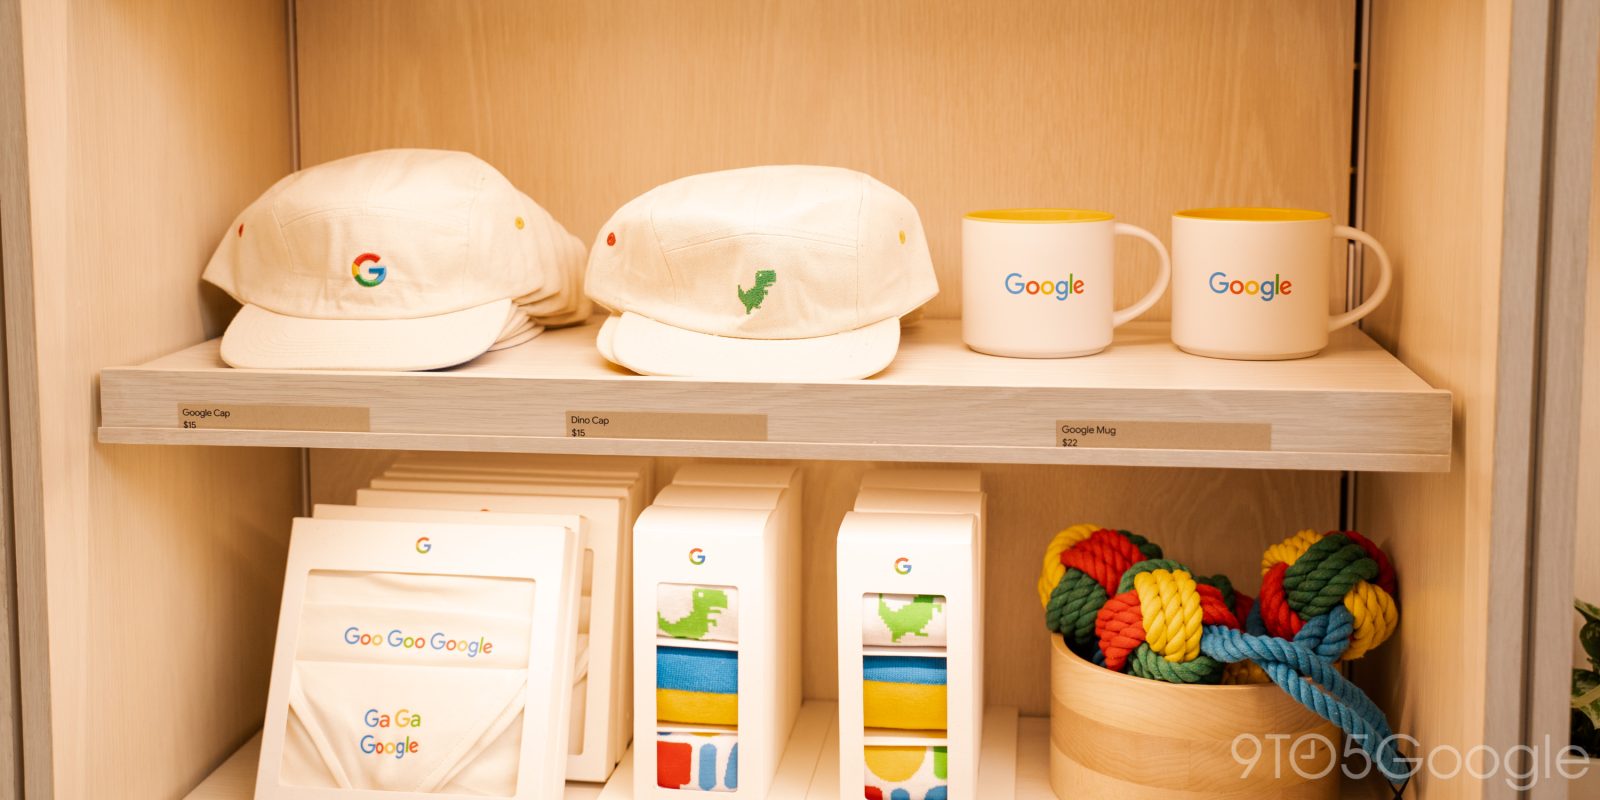 You can now buy Google merch on the online Google Store with your Pixel